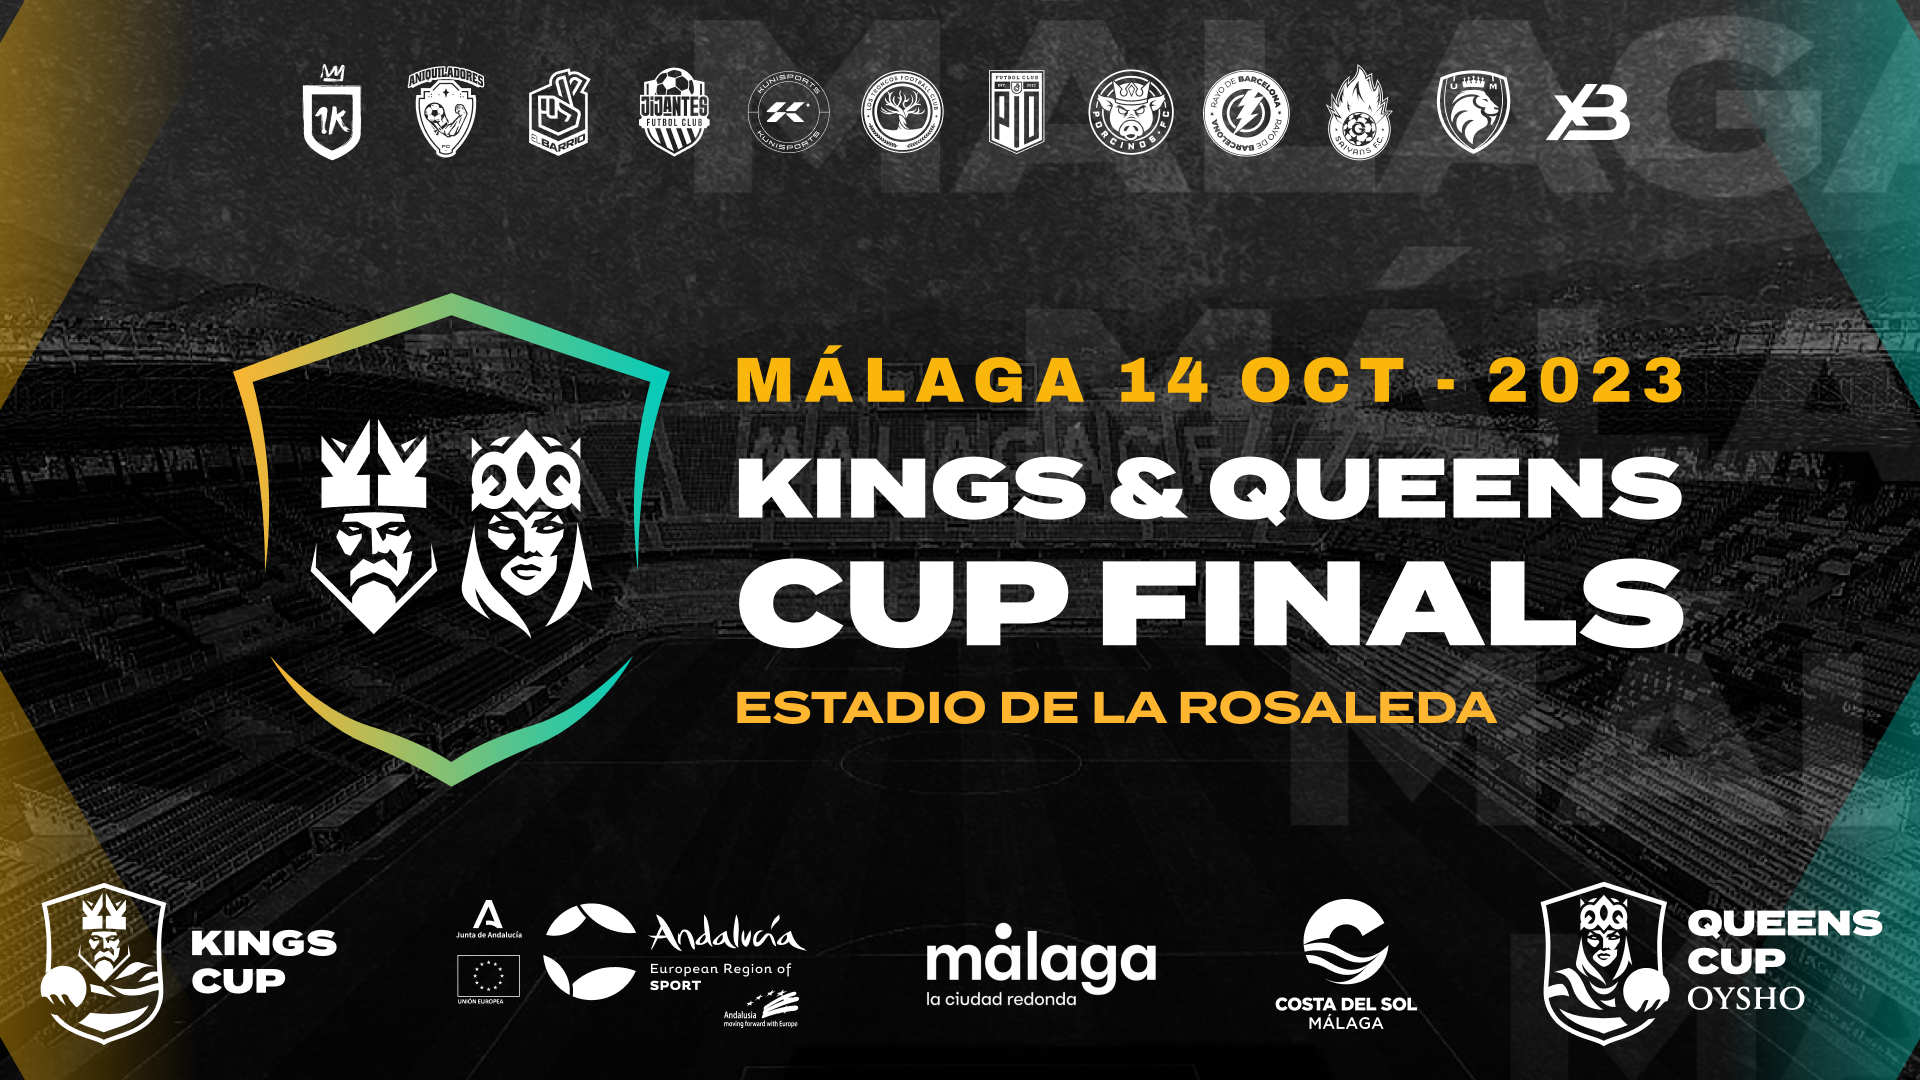 Málaga to host the Kings & Queens Cup Finals on 14th October at La Rosaleda!